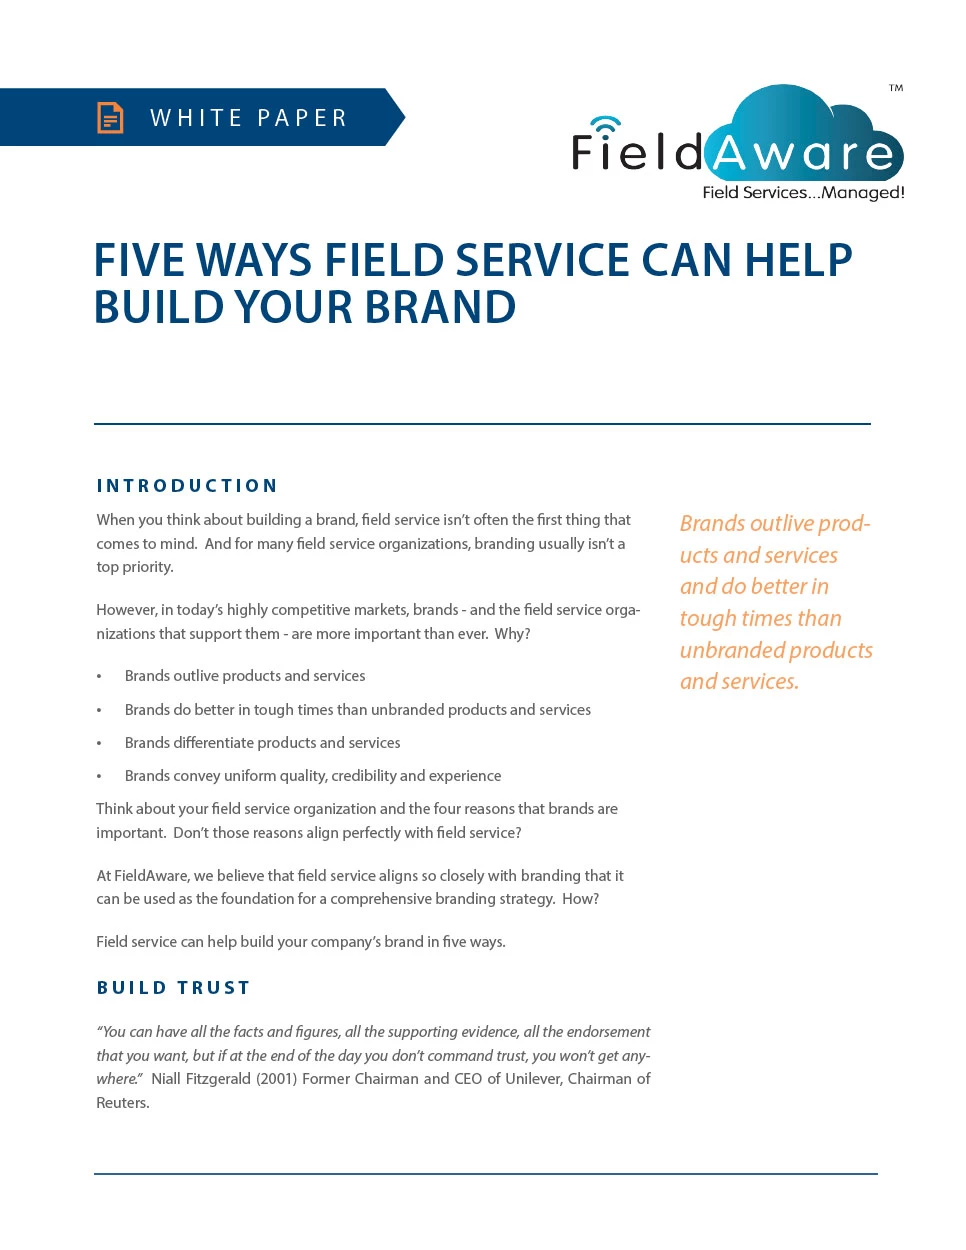 Five Ways Field Service Can Help Build Your Brand White Paper